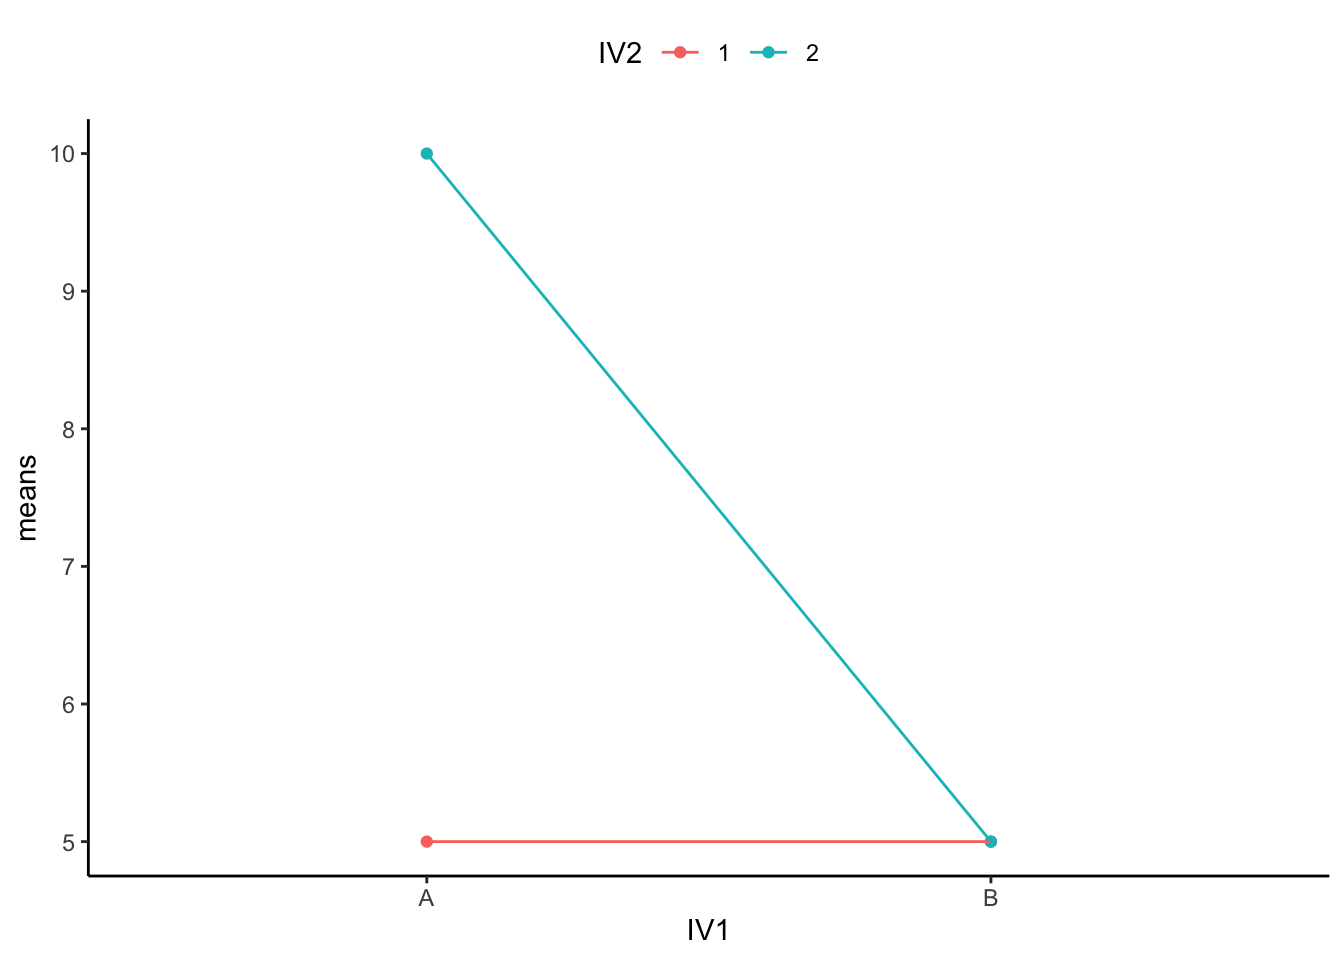 Example data showing how an interaction exists, and a main effect does not, even though the means for the main effect may show a difference